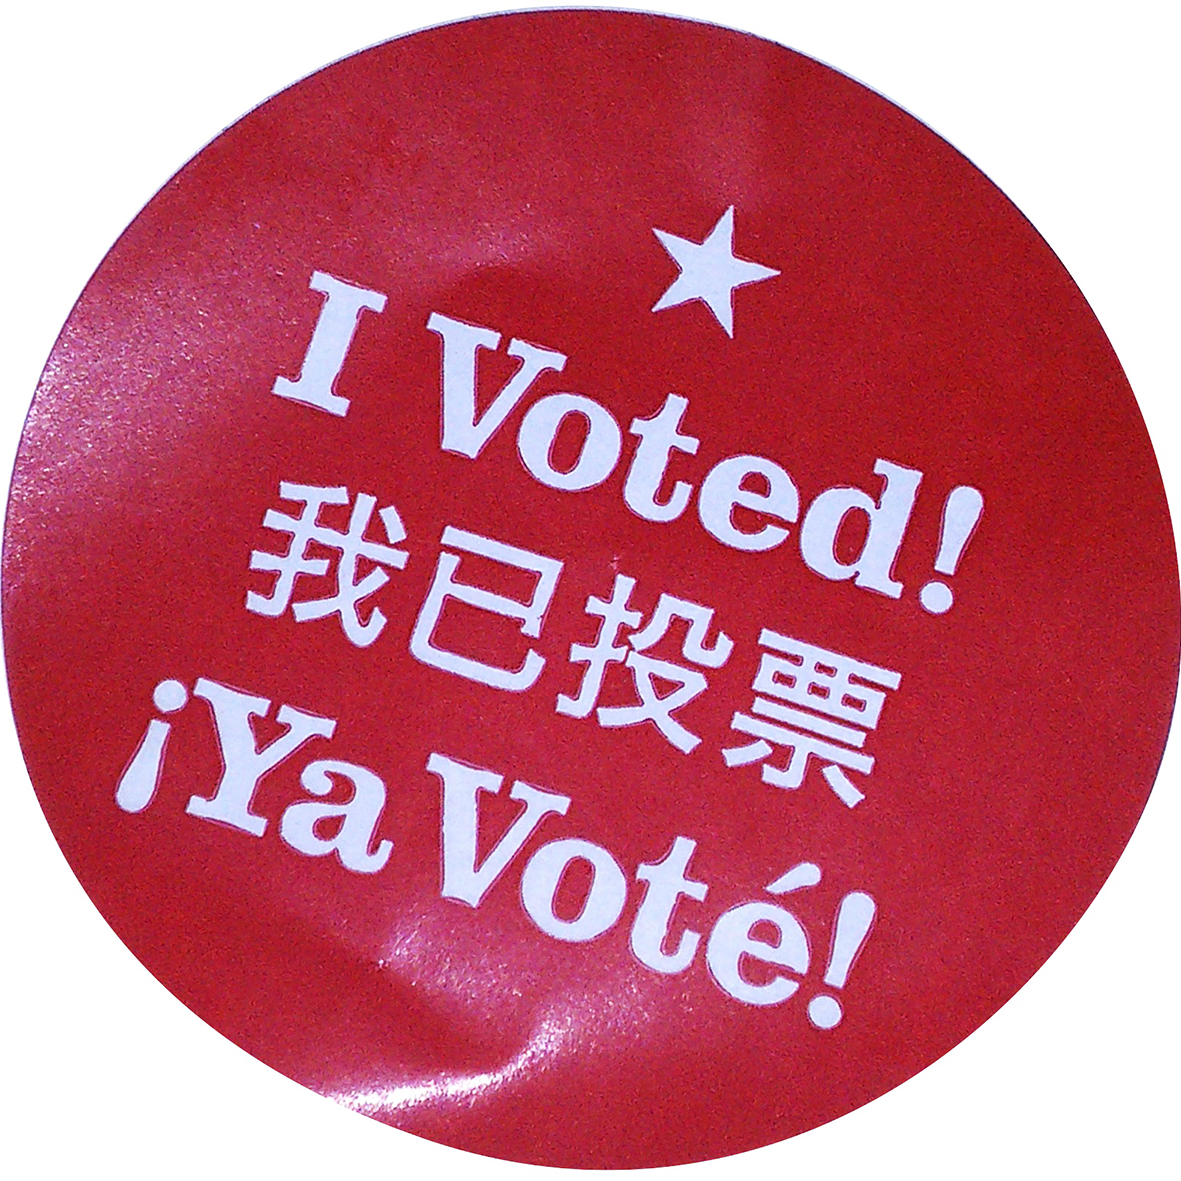 Photo of I Voted sticker in English, Chinese and Spanish